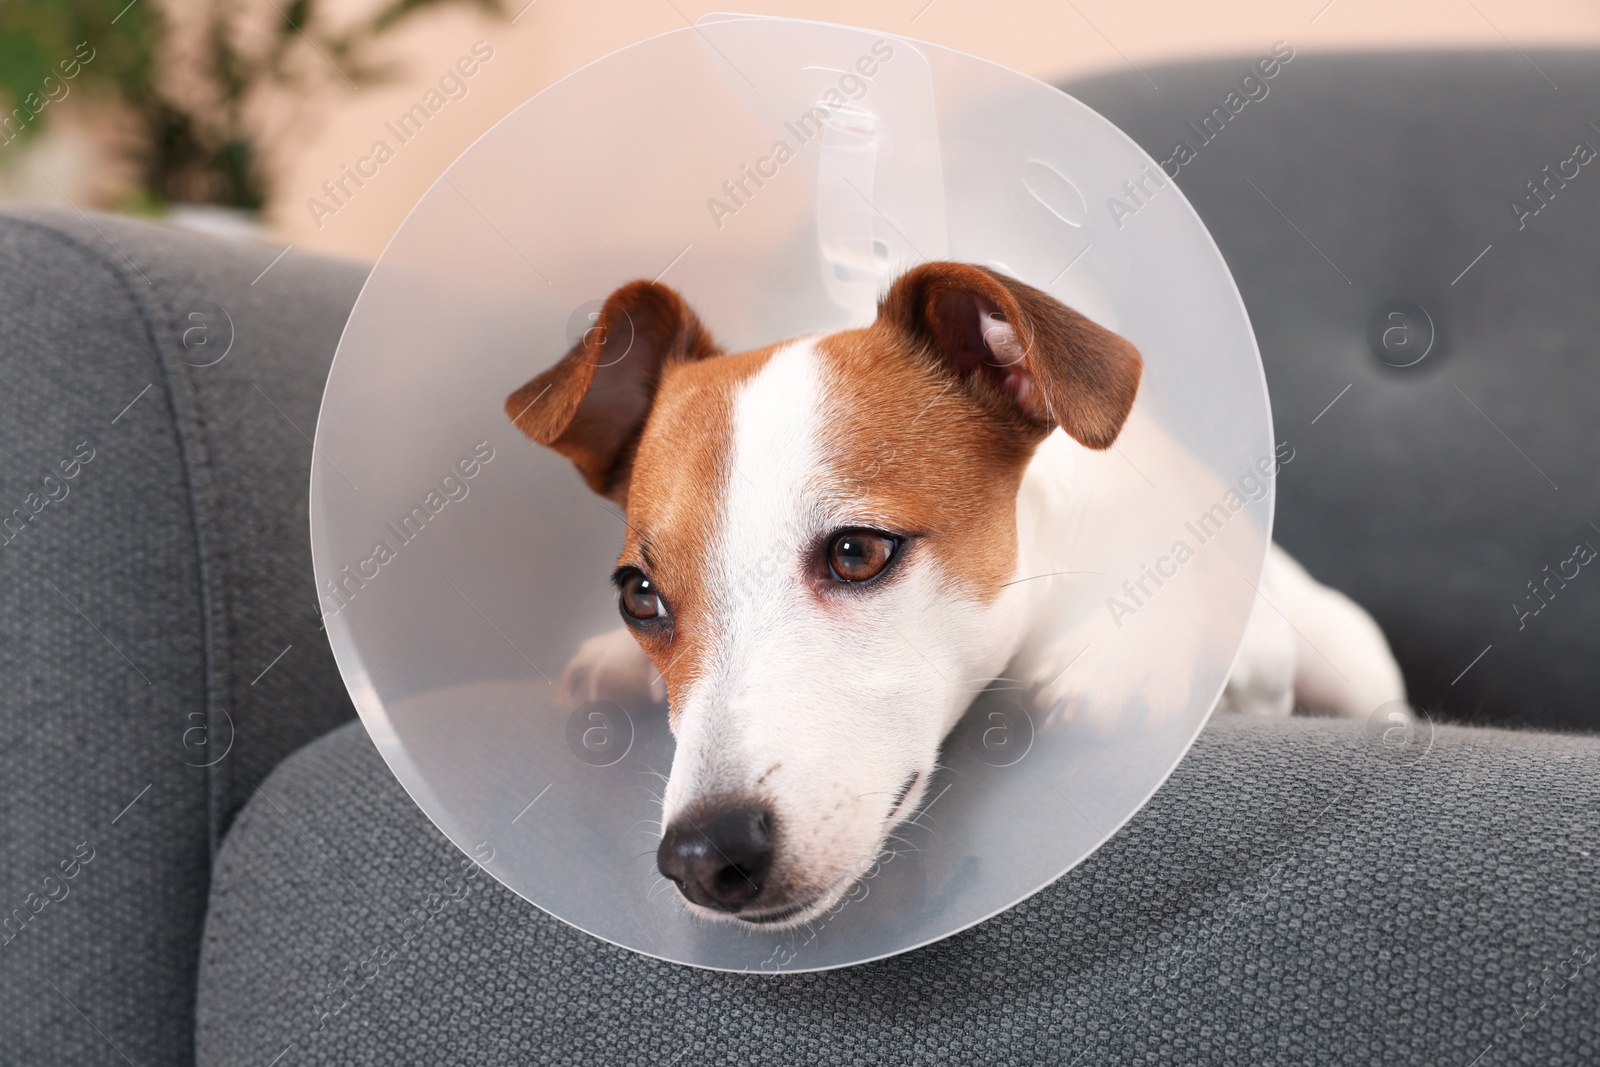 Photo of Jack Russell Terrier dog wearing medical plastic collar on sofa indoors